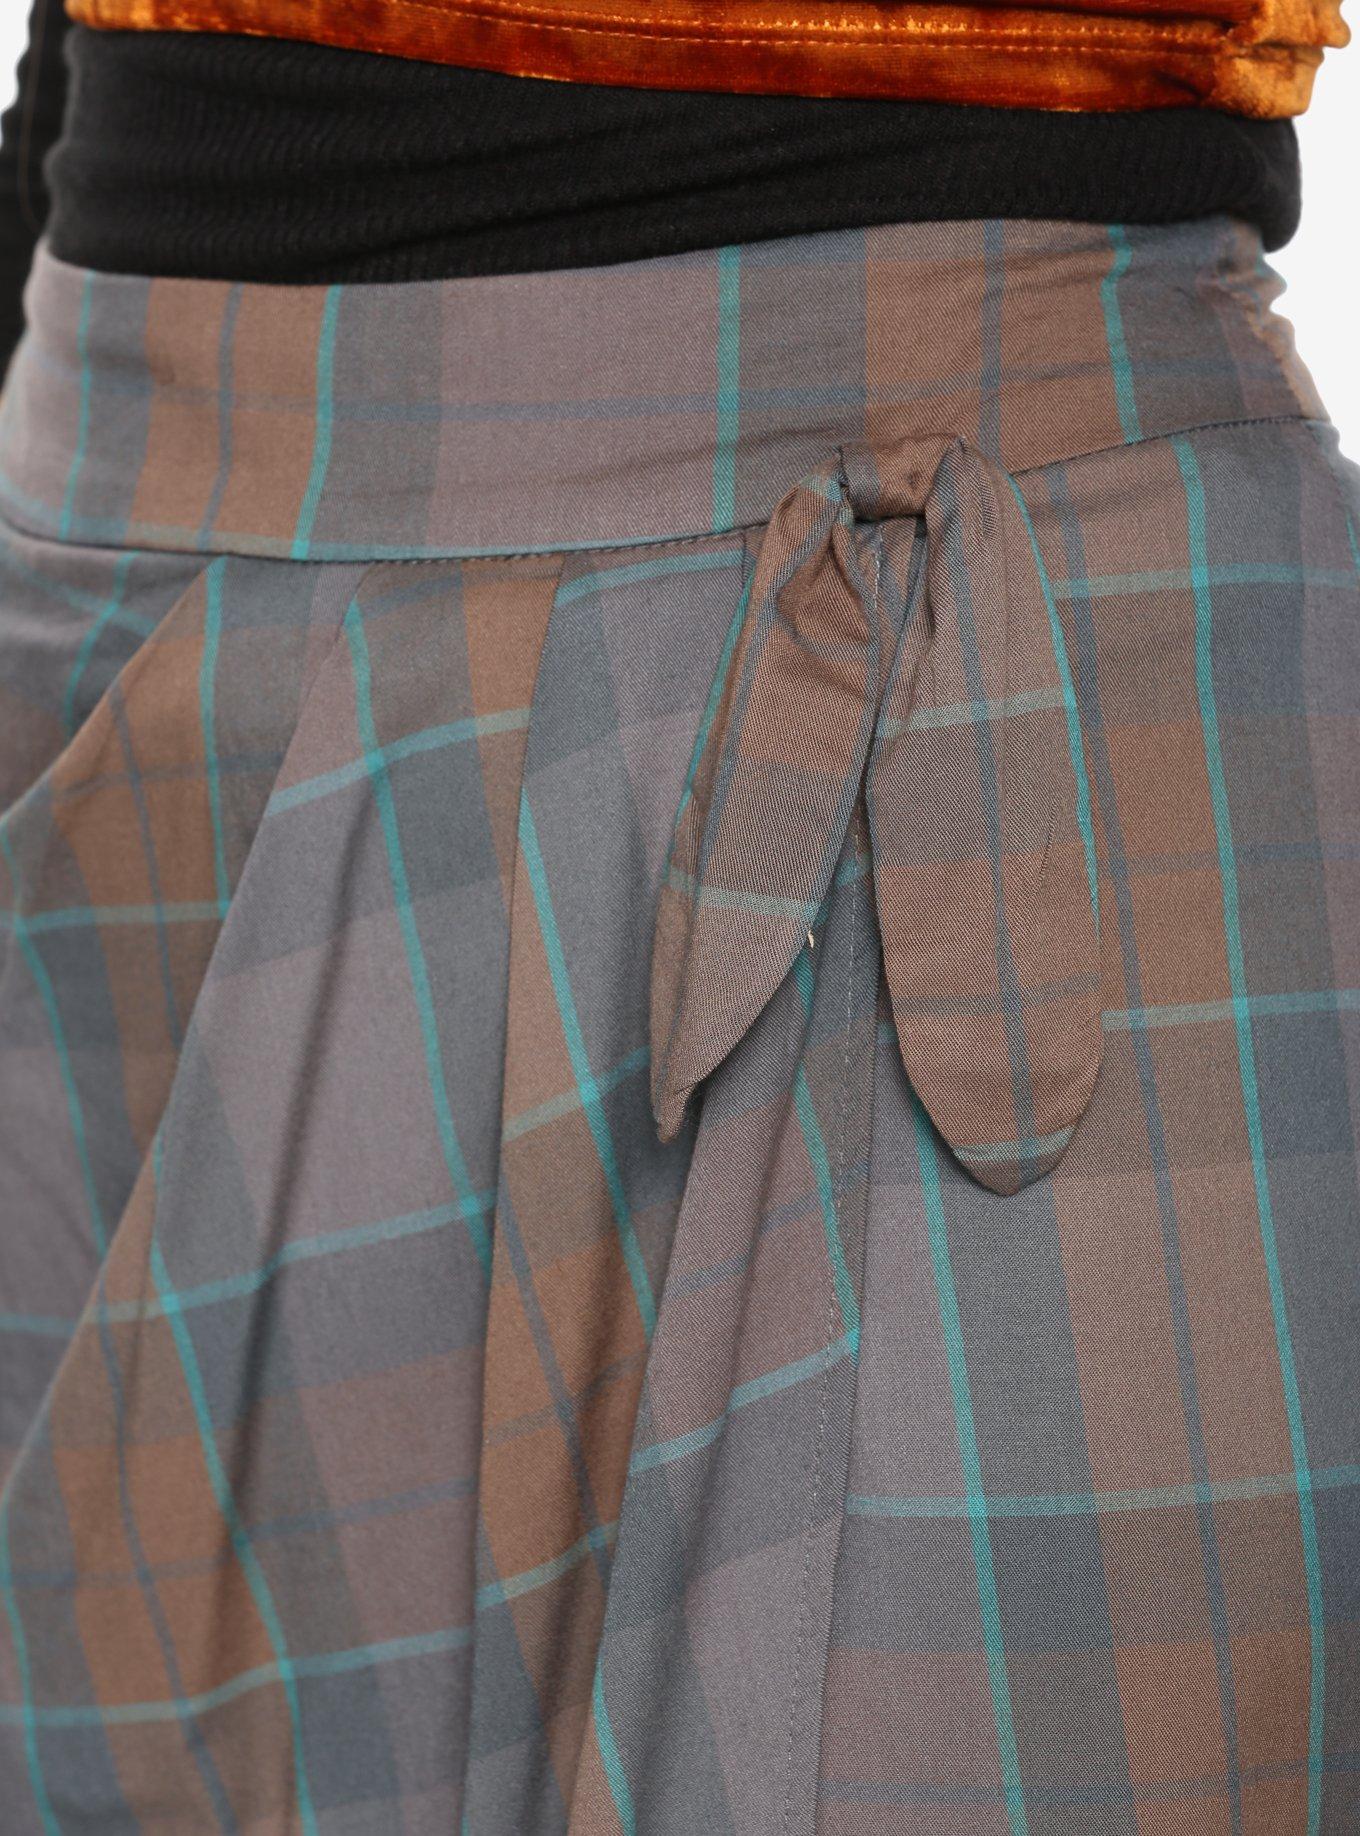 Outlander Faux Side-Tie Skirt Hot Topic Exclusive, PLAID, alternate